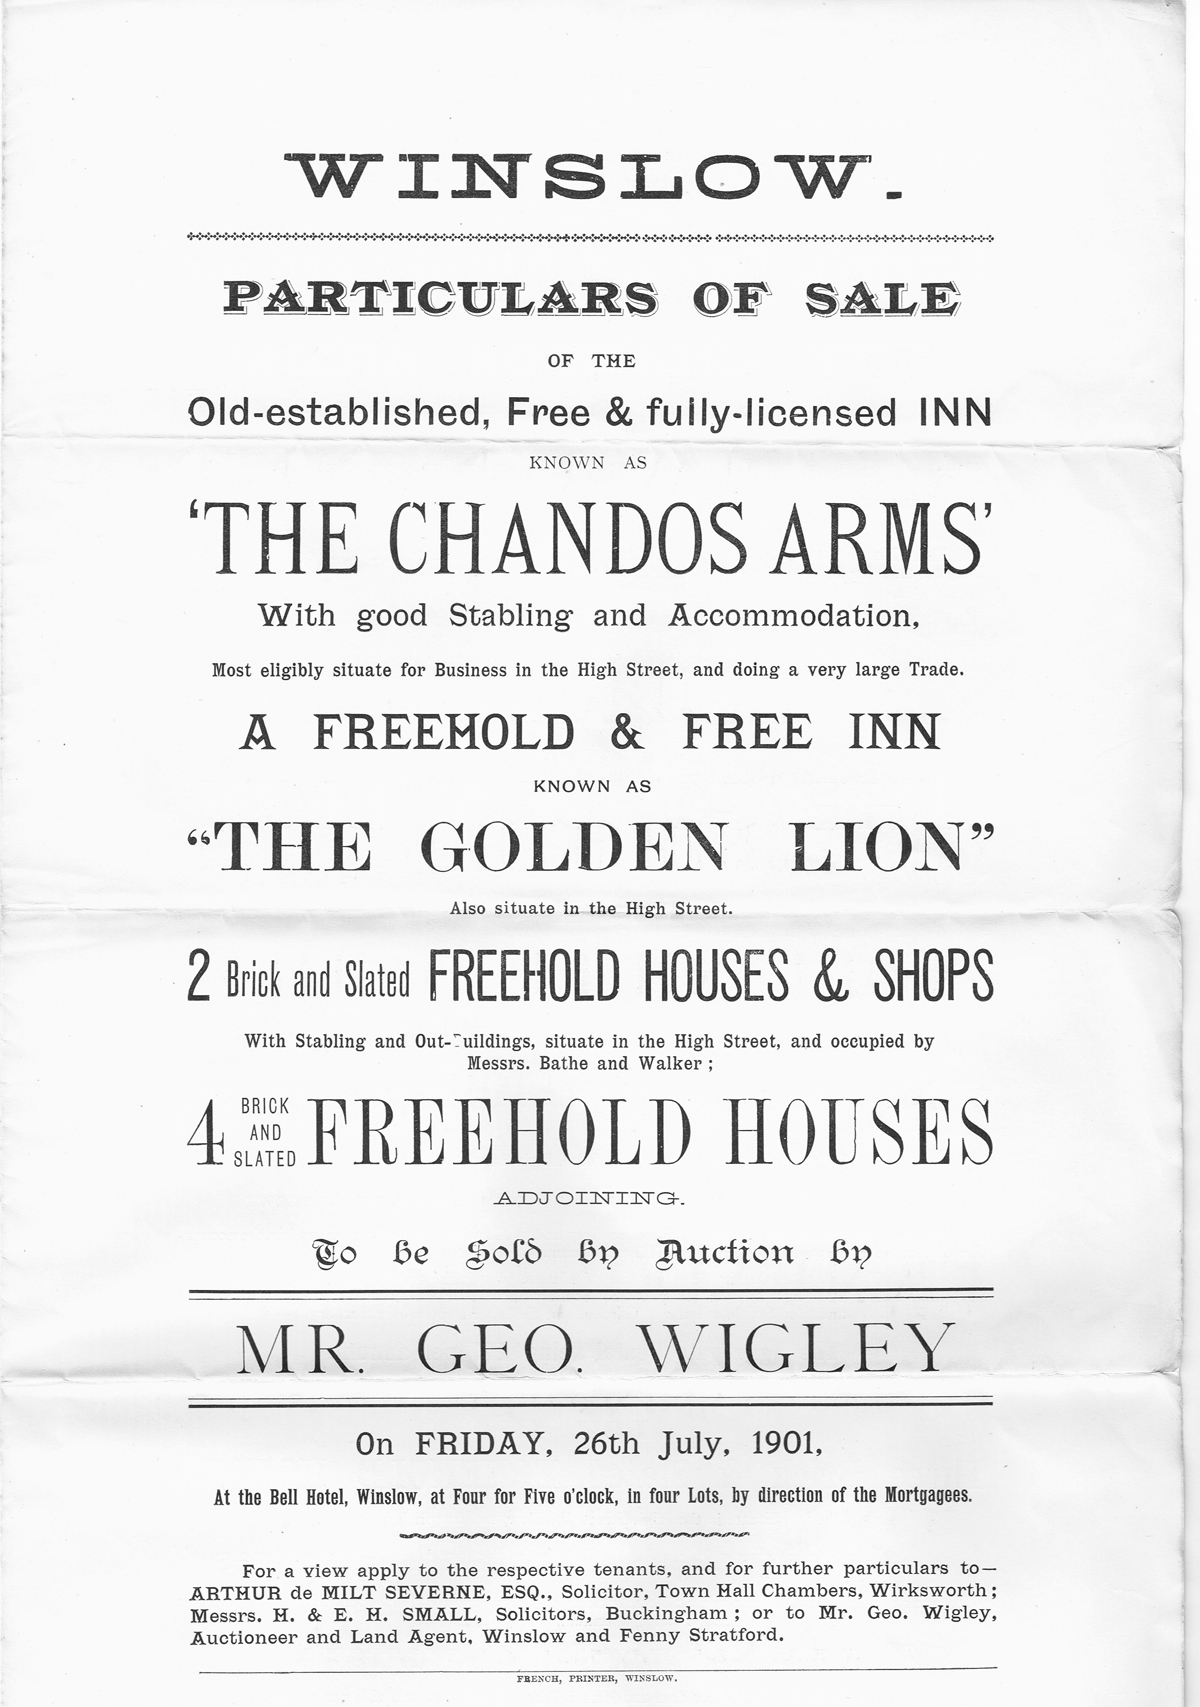 Sale poster for Chandos Arms and Golden Lion